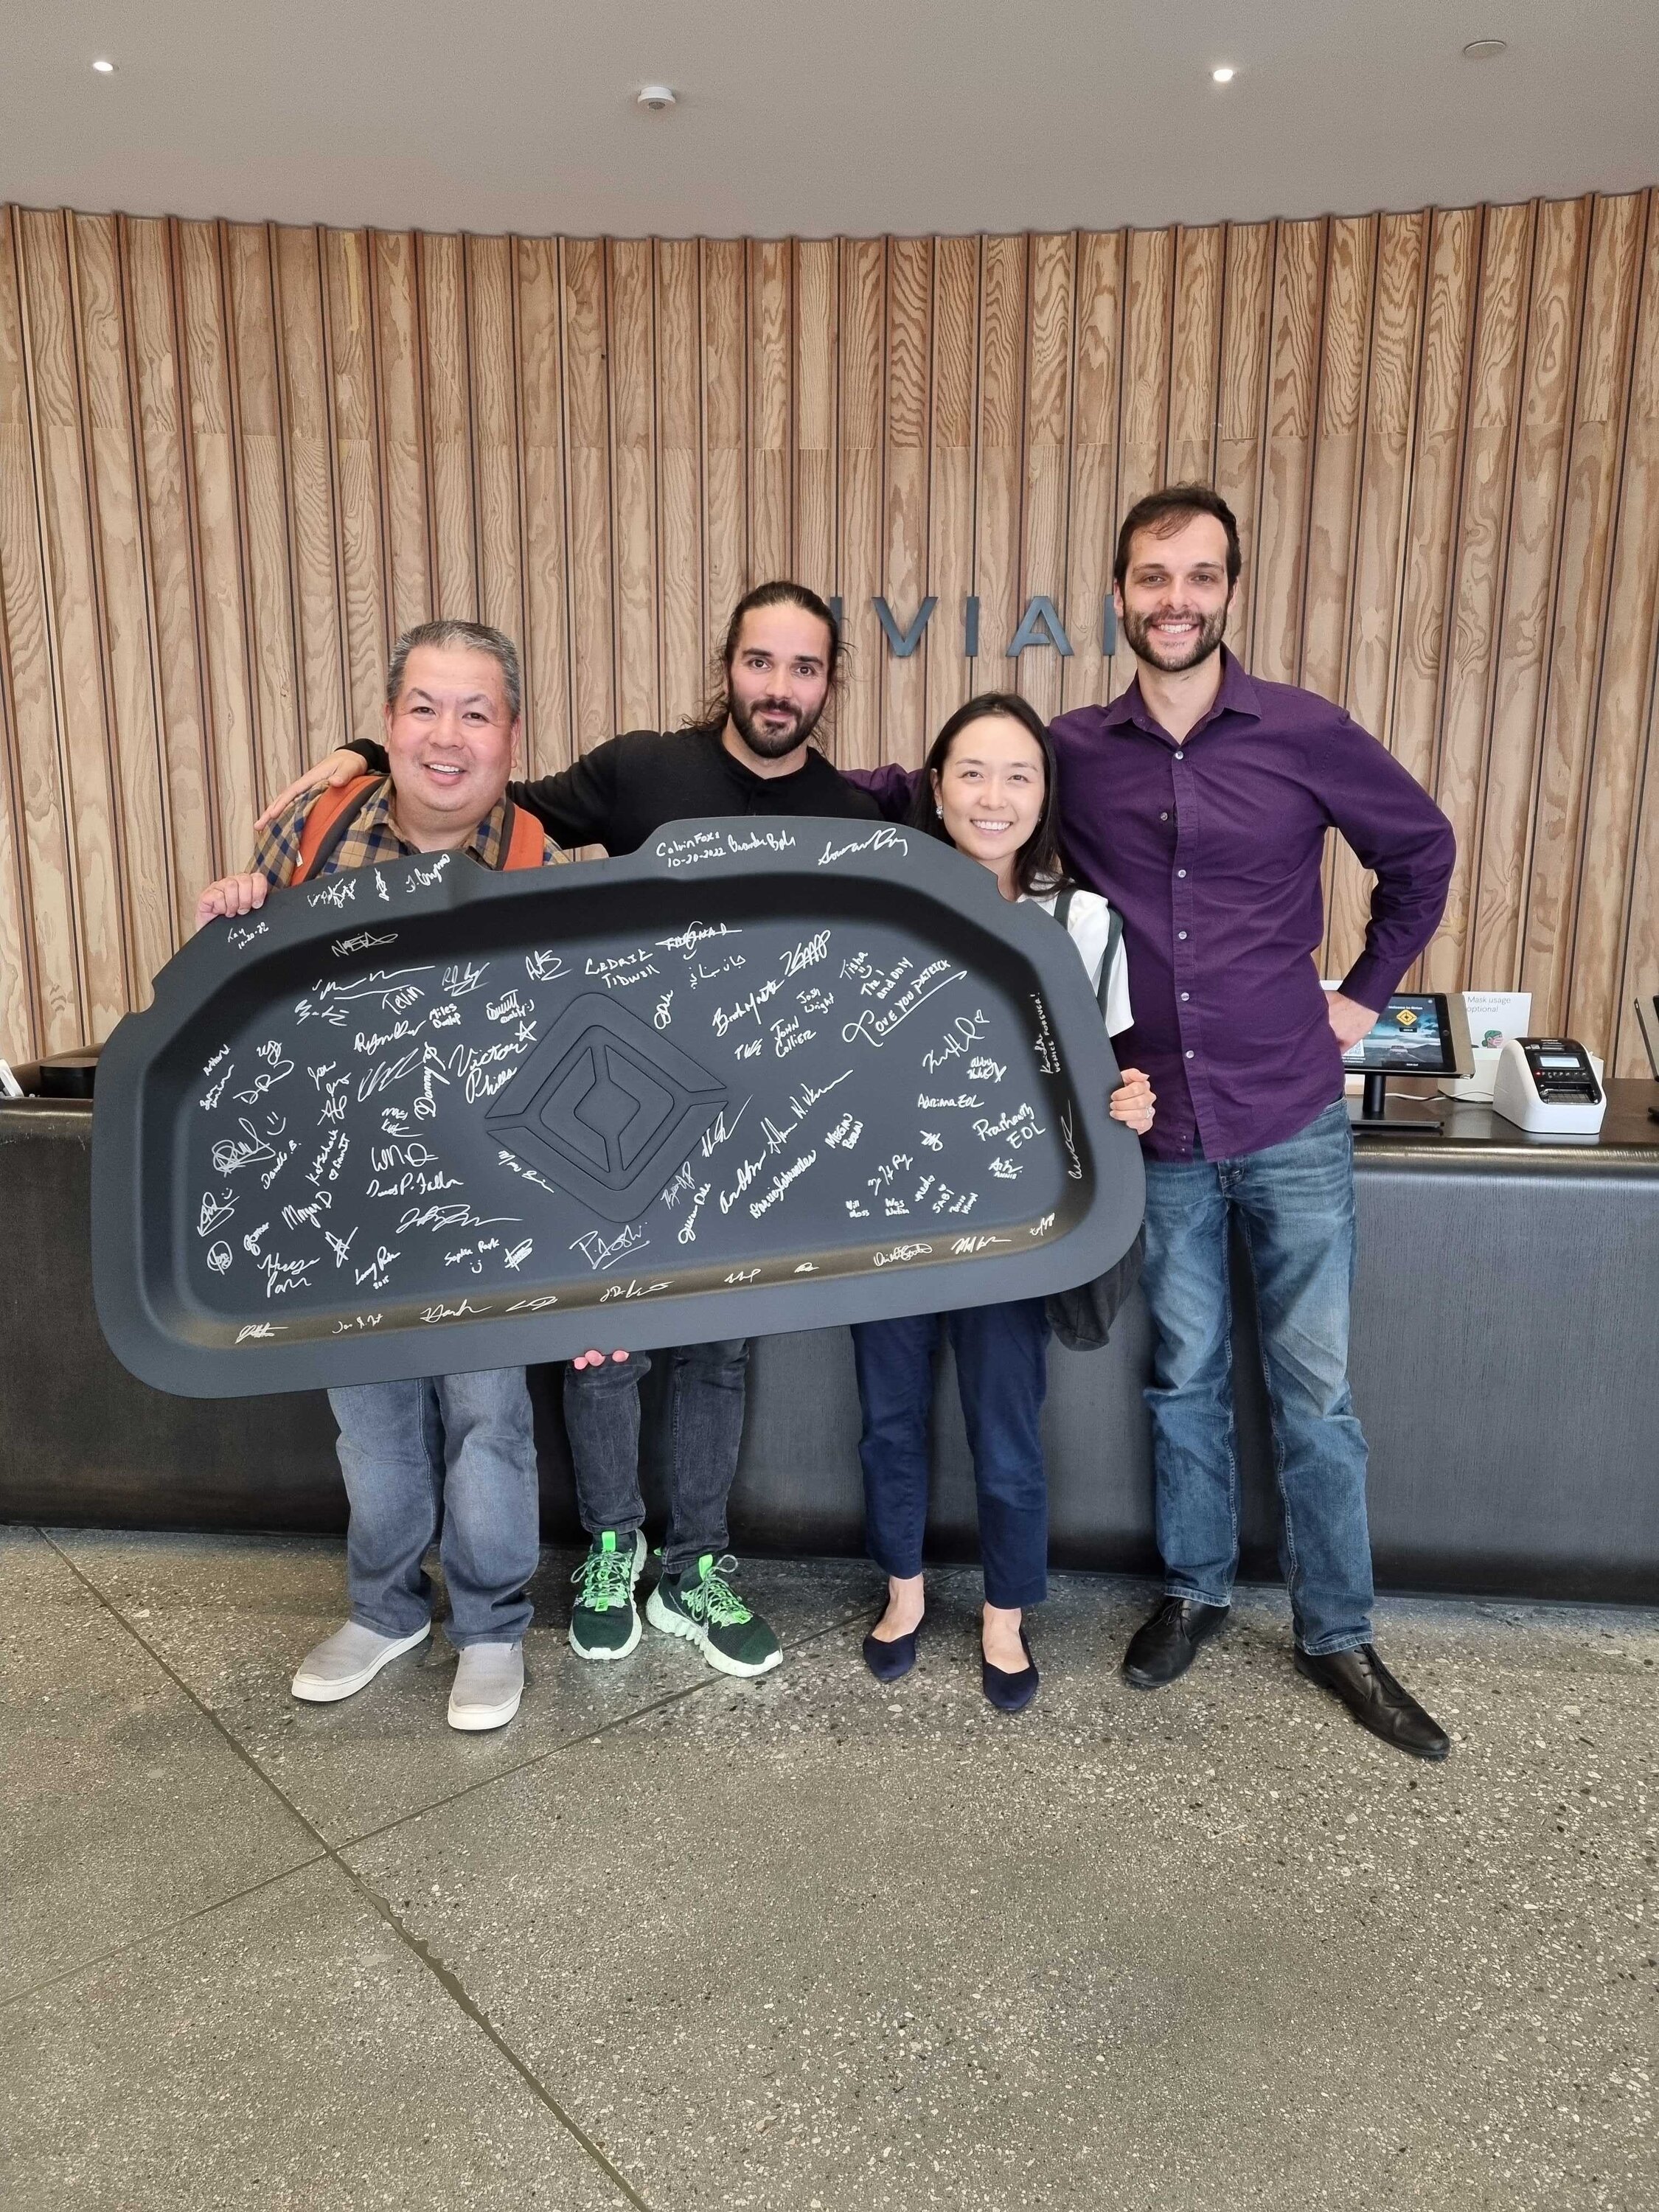 Rivian R1T R1S Grateful and Adventurous Forever For Meeting Amazing Rivian Folks the Last Two Weeks IRV